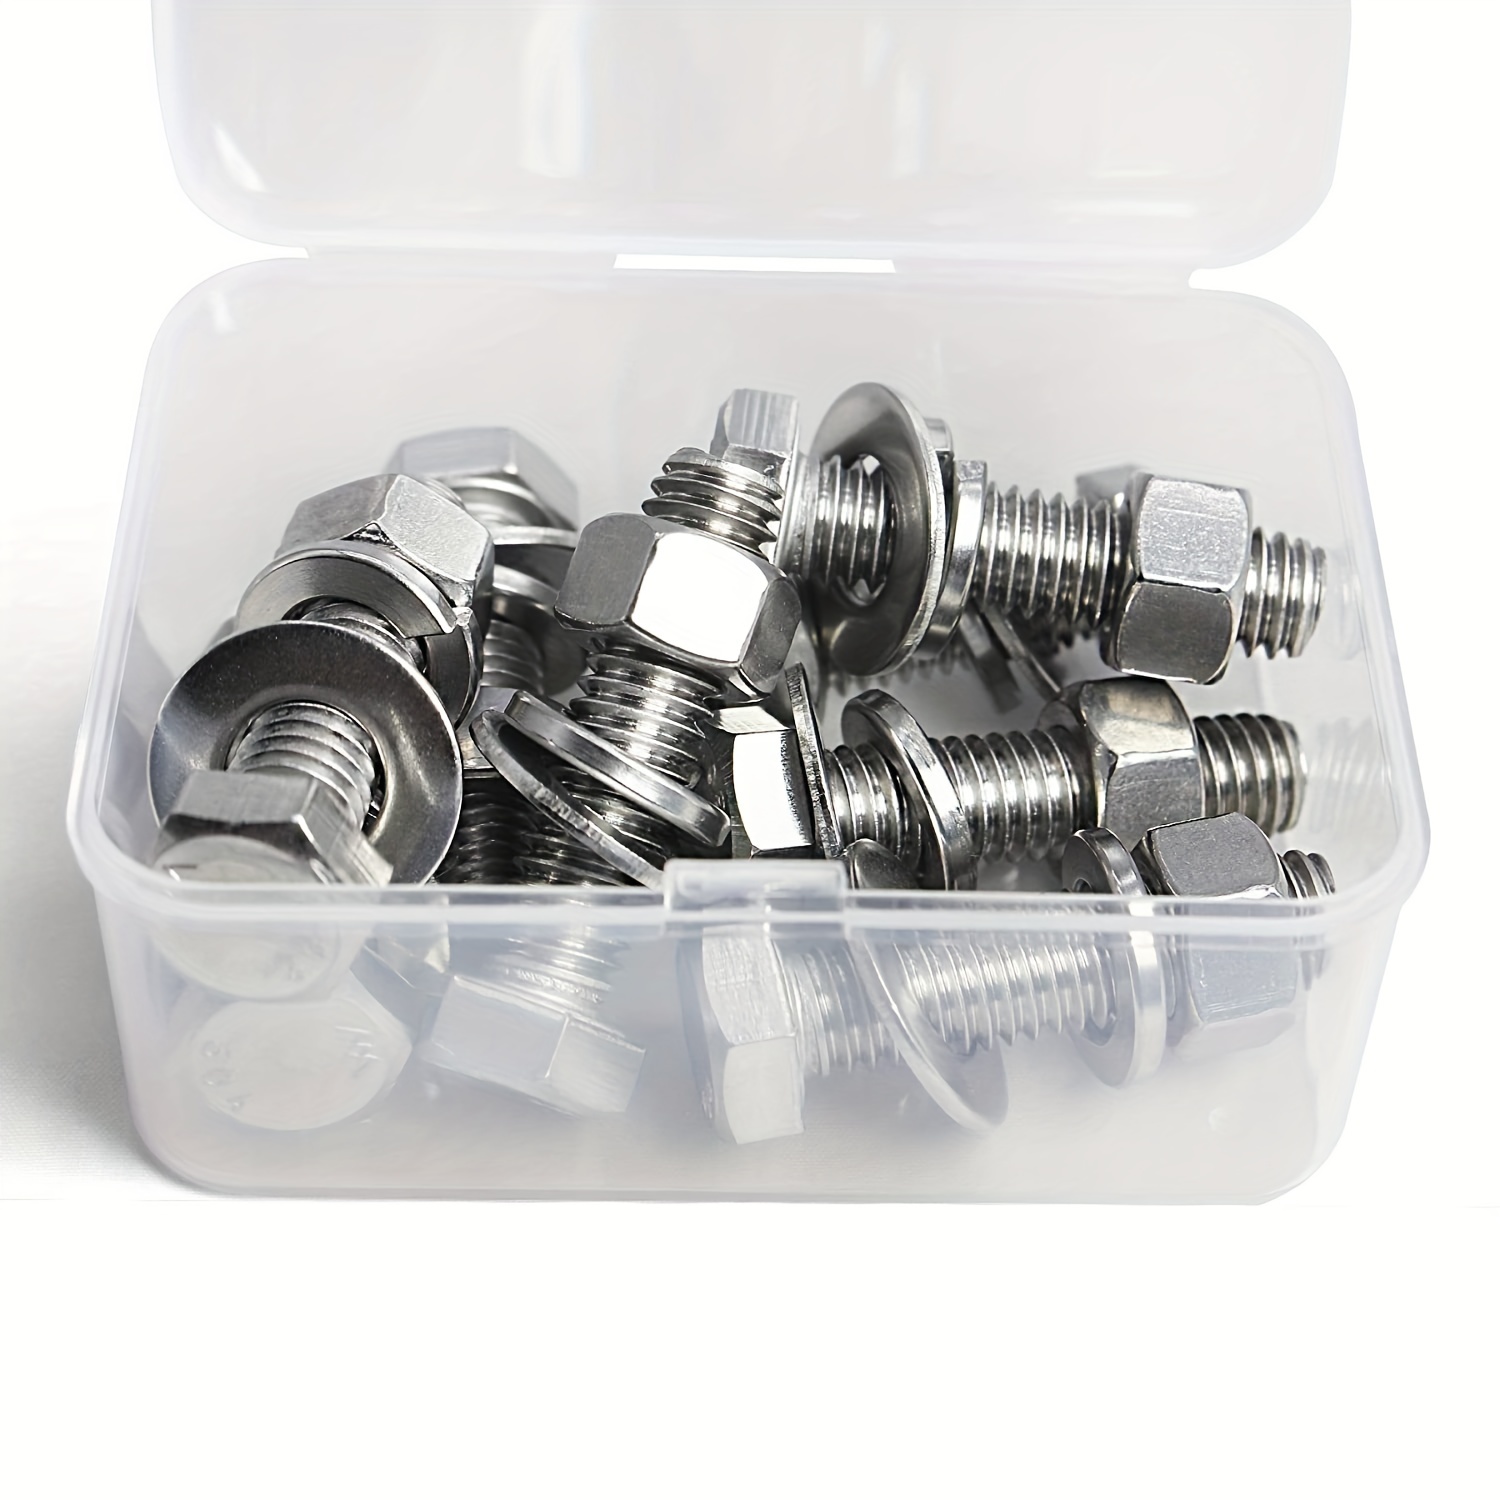 External Hexagon Head Bolt Screws Nuts Flat Washers And Locking Washers Stainless  Steel 304 Machine Full Thread 1 4 20 Inch Classification Kit, Free  Shipping On Items Shipped From Temu